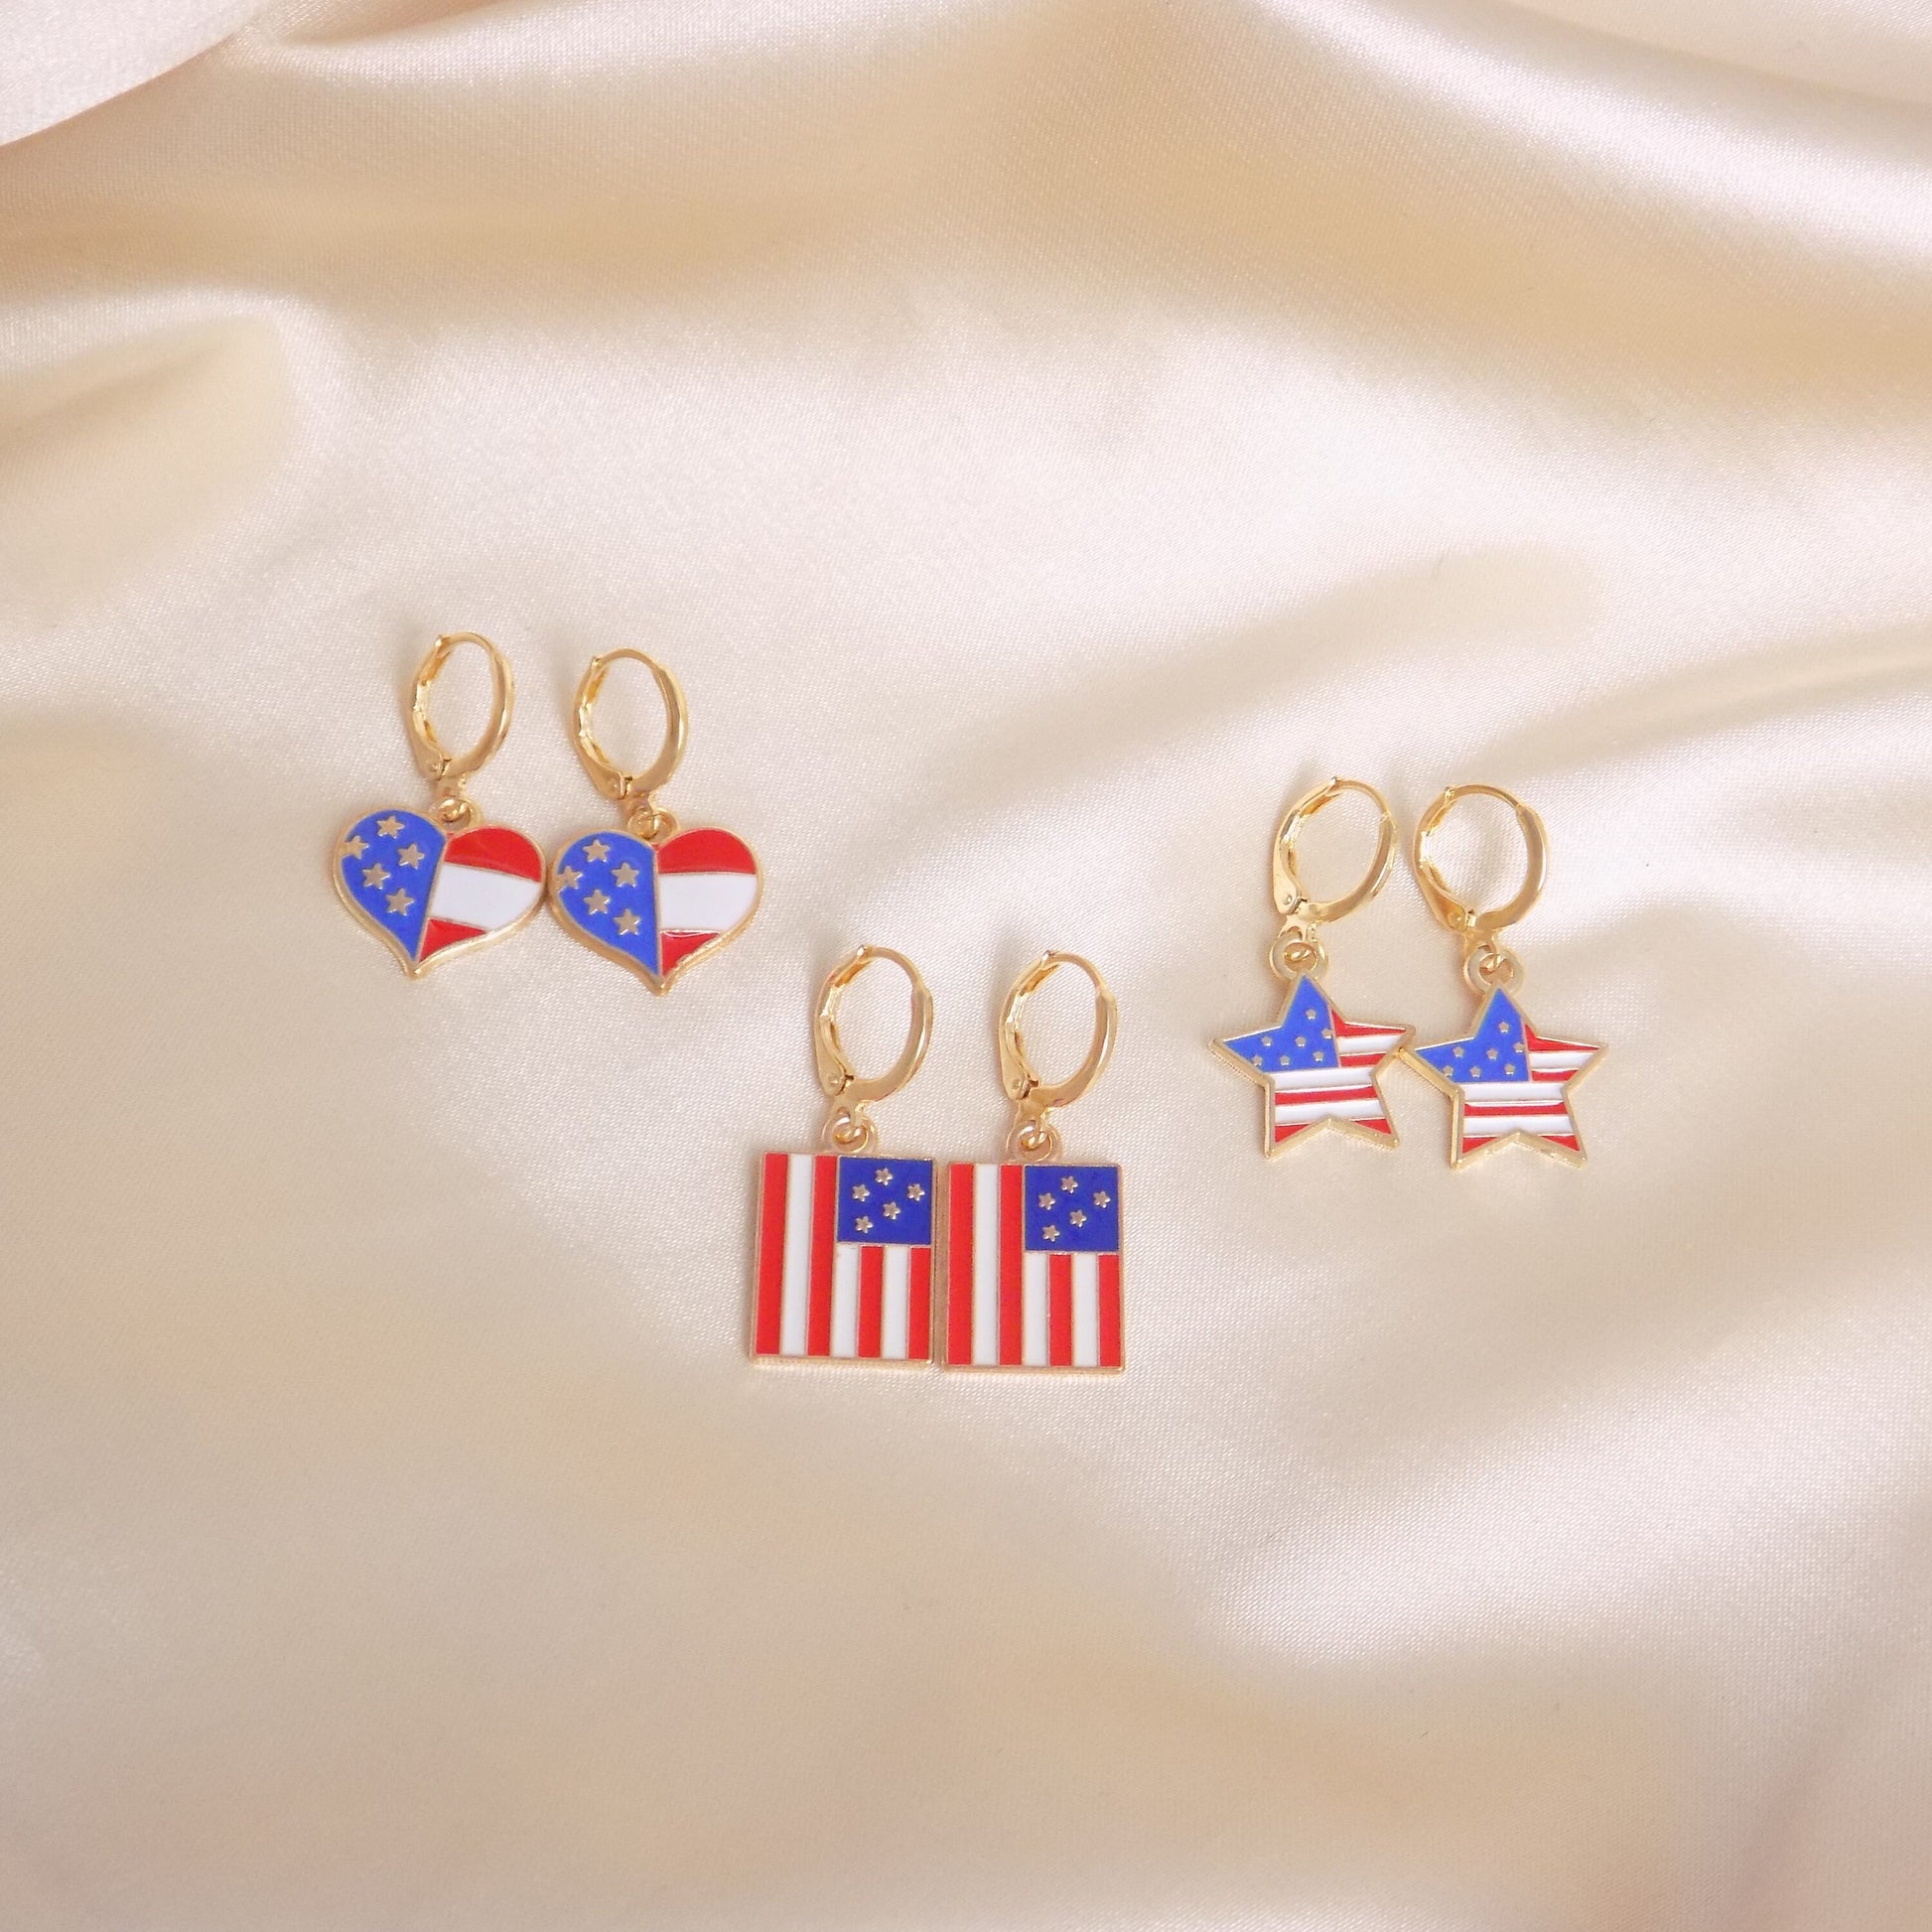 Unique American Flag Earrings, Heart Earrings, Star Earrings, Independence Day Gifts For Her, M7-306